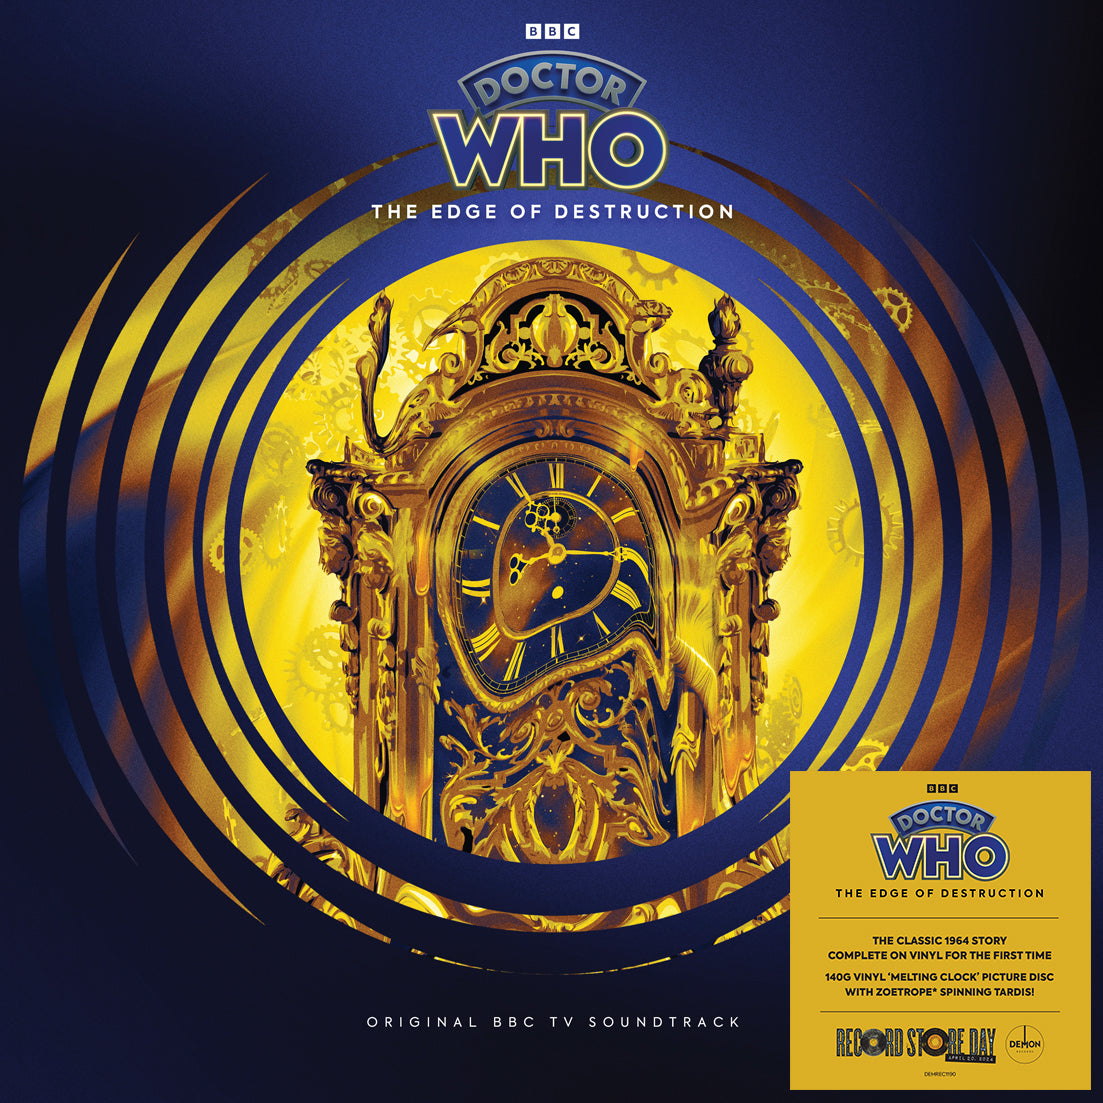 DOCTOR WHO - Doctor Who: The Edge of Destruction (Zoetrope Picture Disc) - 1 LP - Zoetrope Picture Disc [RSD 2024]